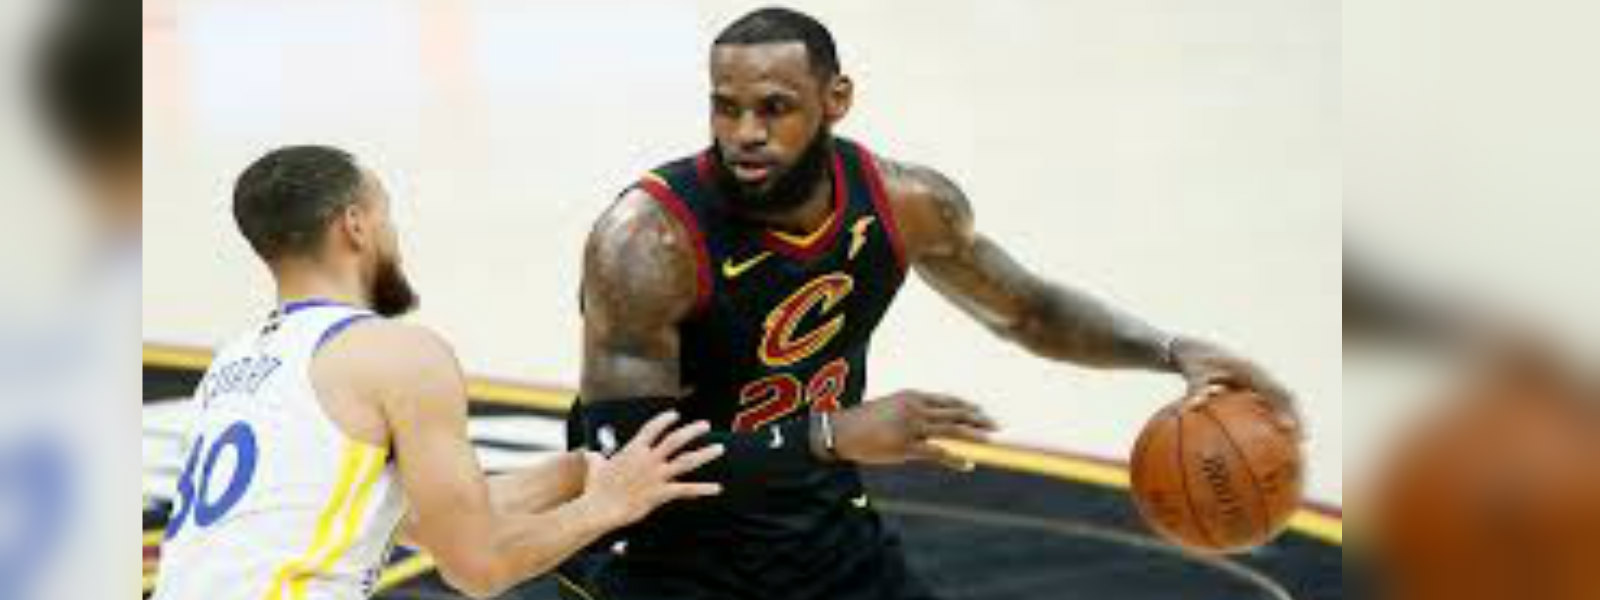 LeBron signs $154 million contract with LA Lakers 